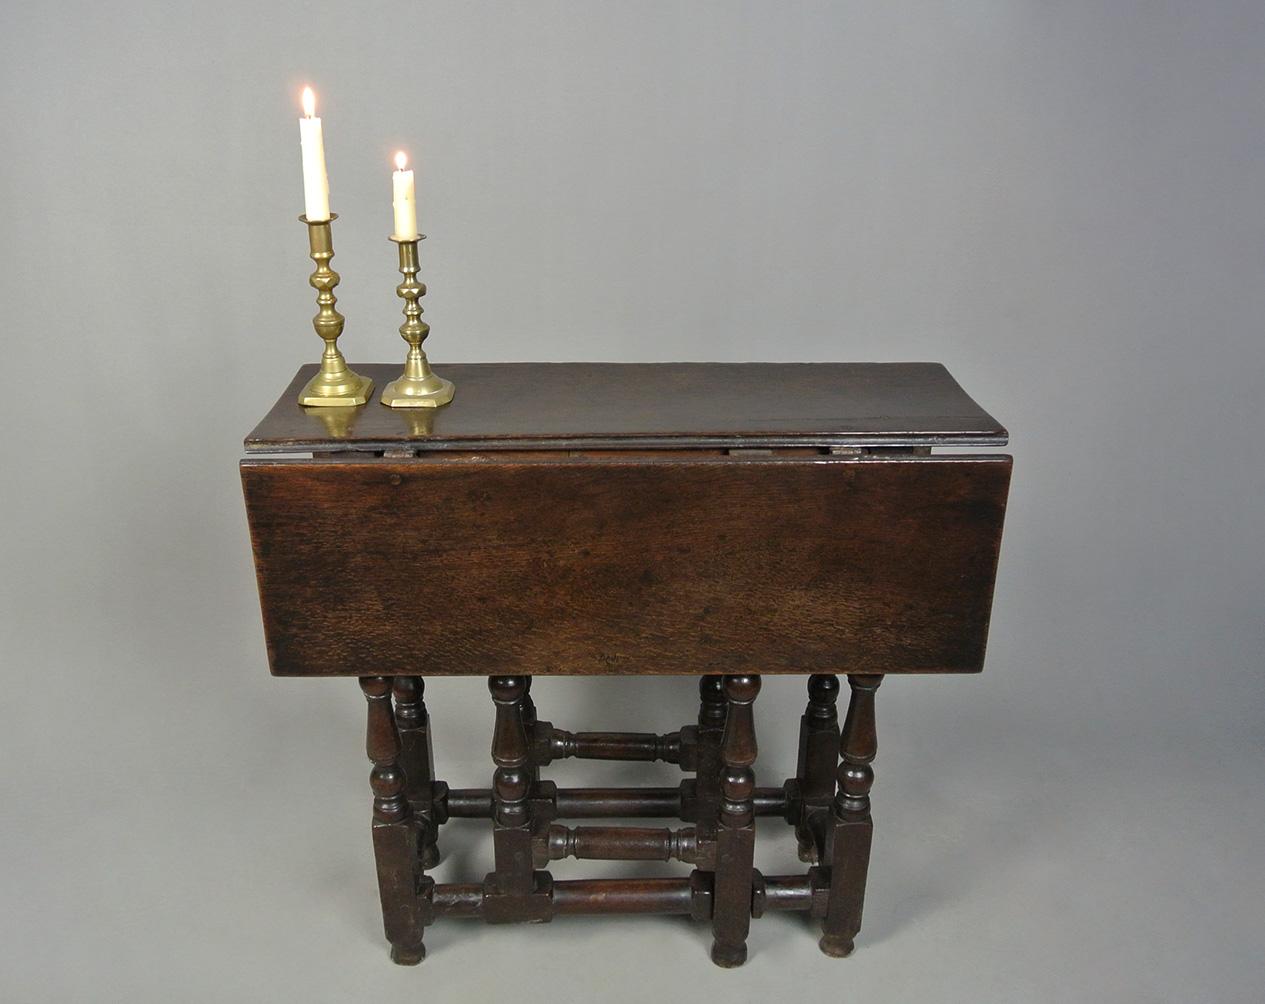 Original Queen Anne Oak Small Supper Table with Provenance c. 1700 For Sale 2